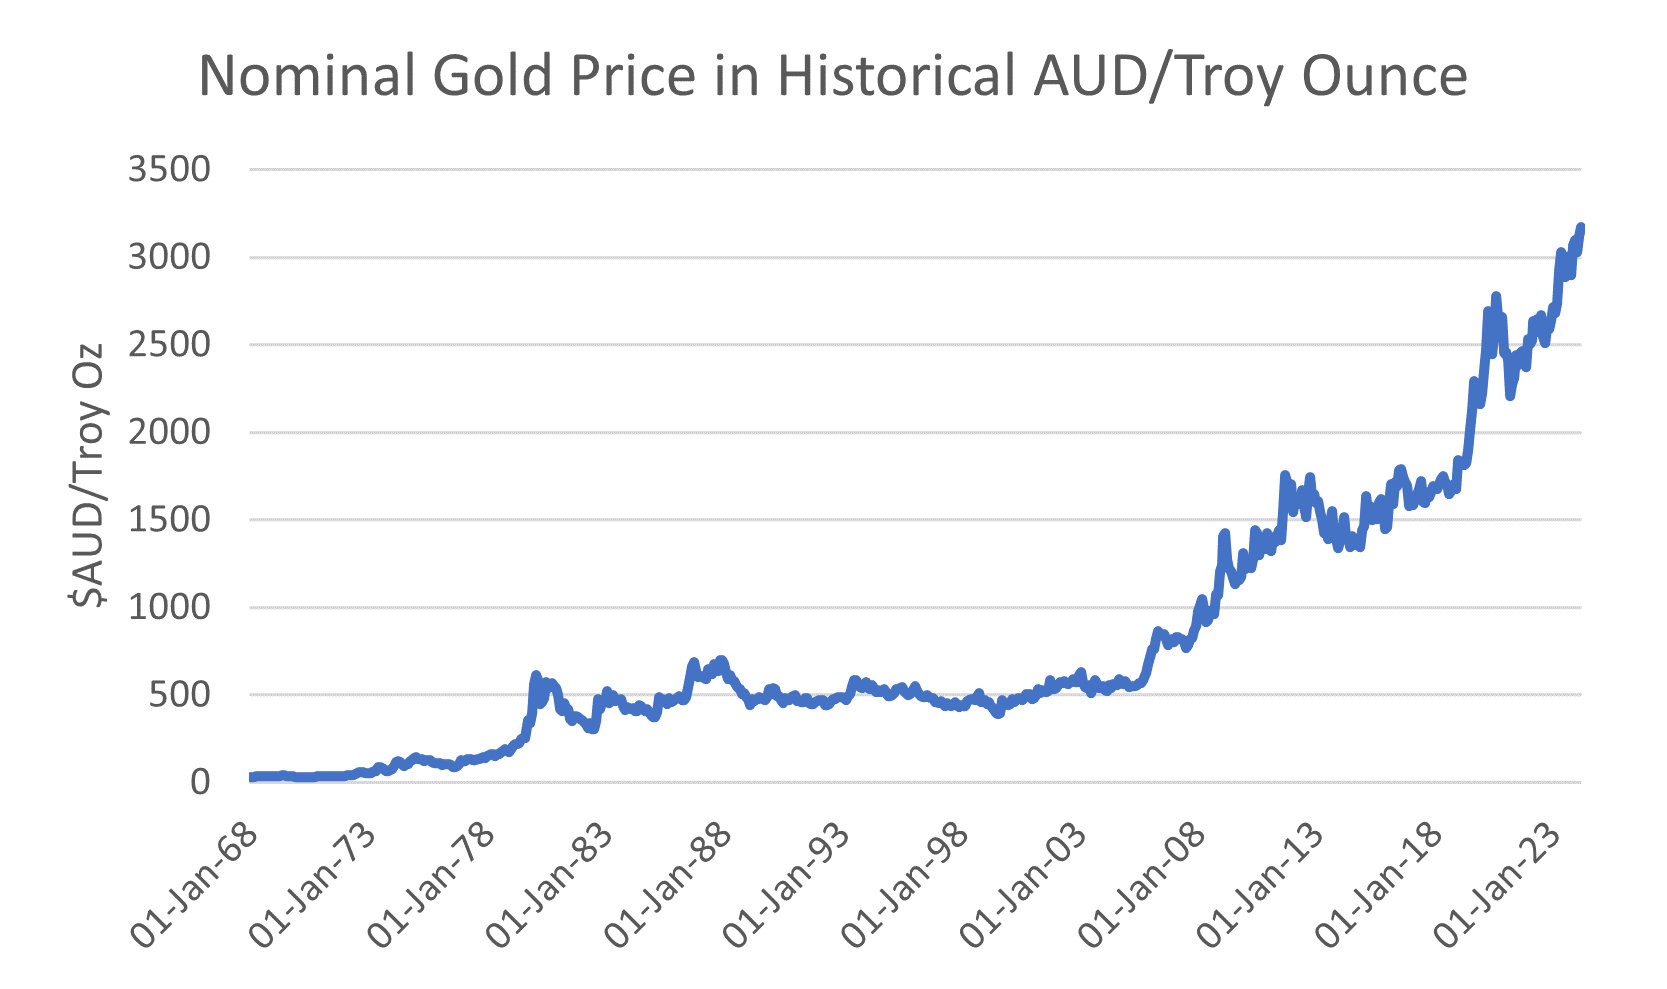 How about that people? The history of nominal gold priced in AUD. Source: LSEG Datastream.